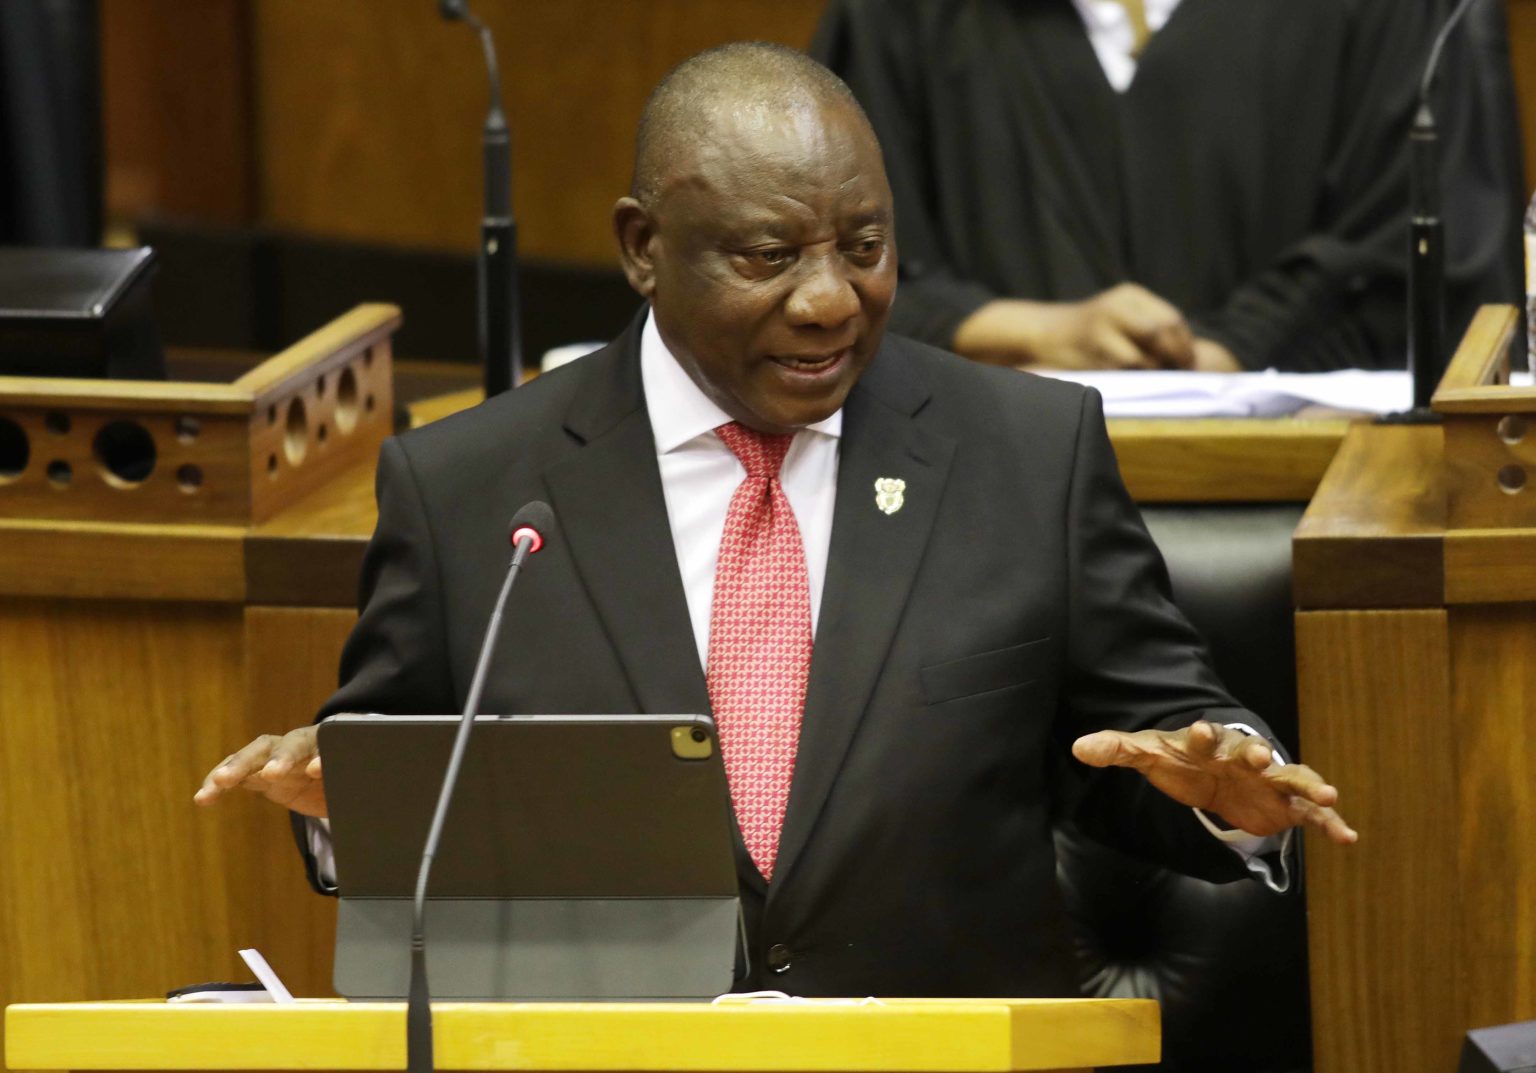 South Africa S Ramaphosa Says Anc Should Have Done More To Prevent Zuma Era Corruption Cnbc Africa